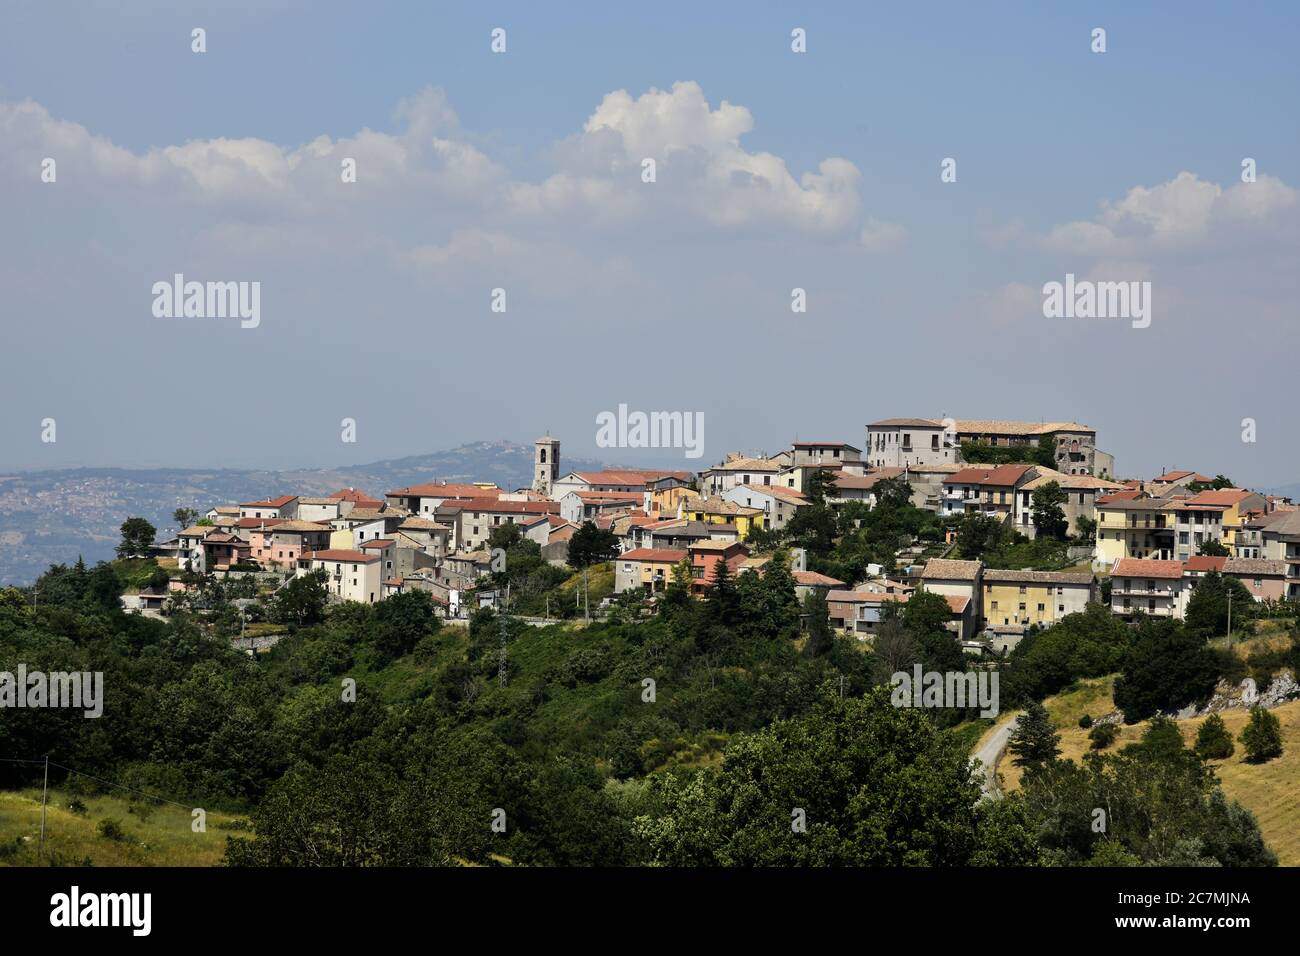 Panoramic view of Montemarano, a city in the province of Avellino. Stock Photo